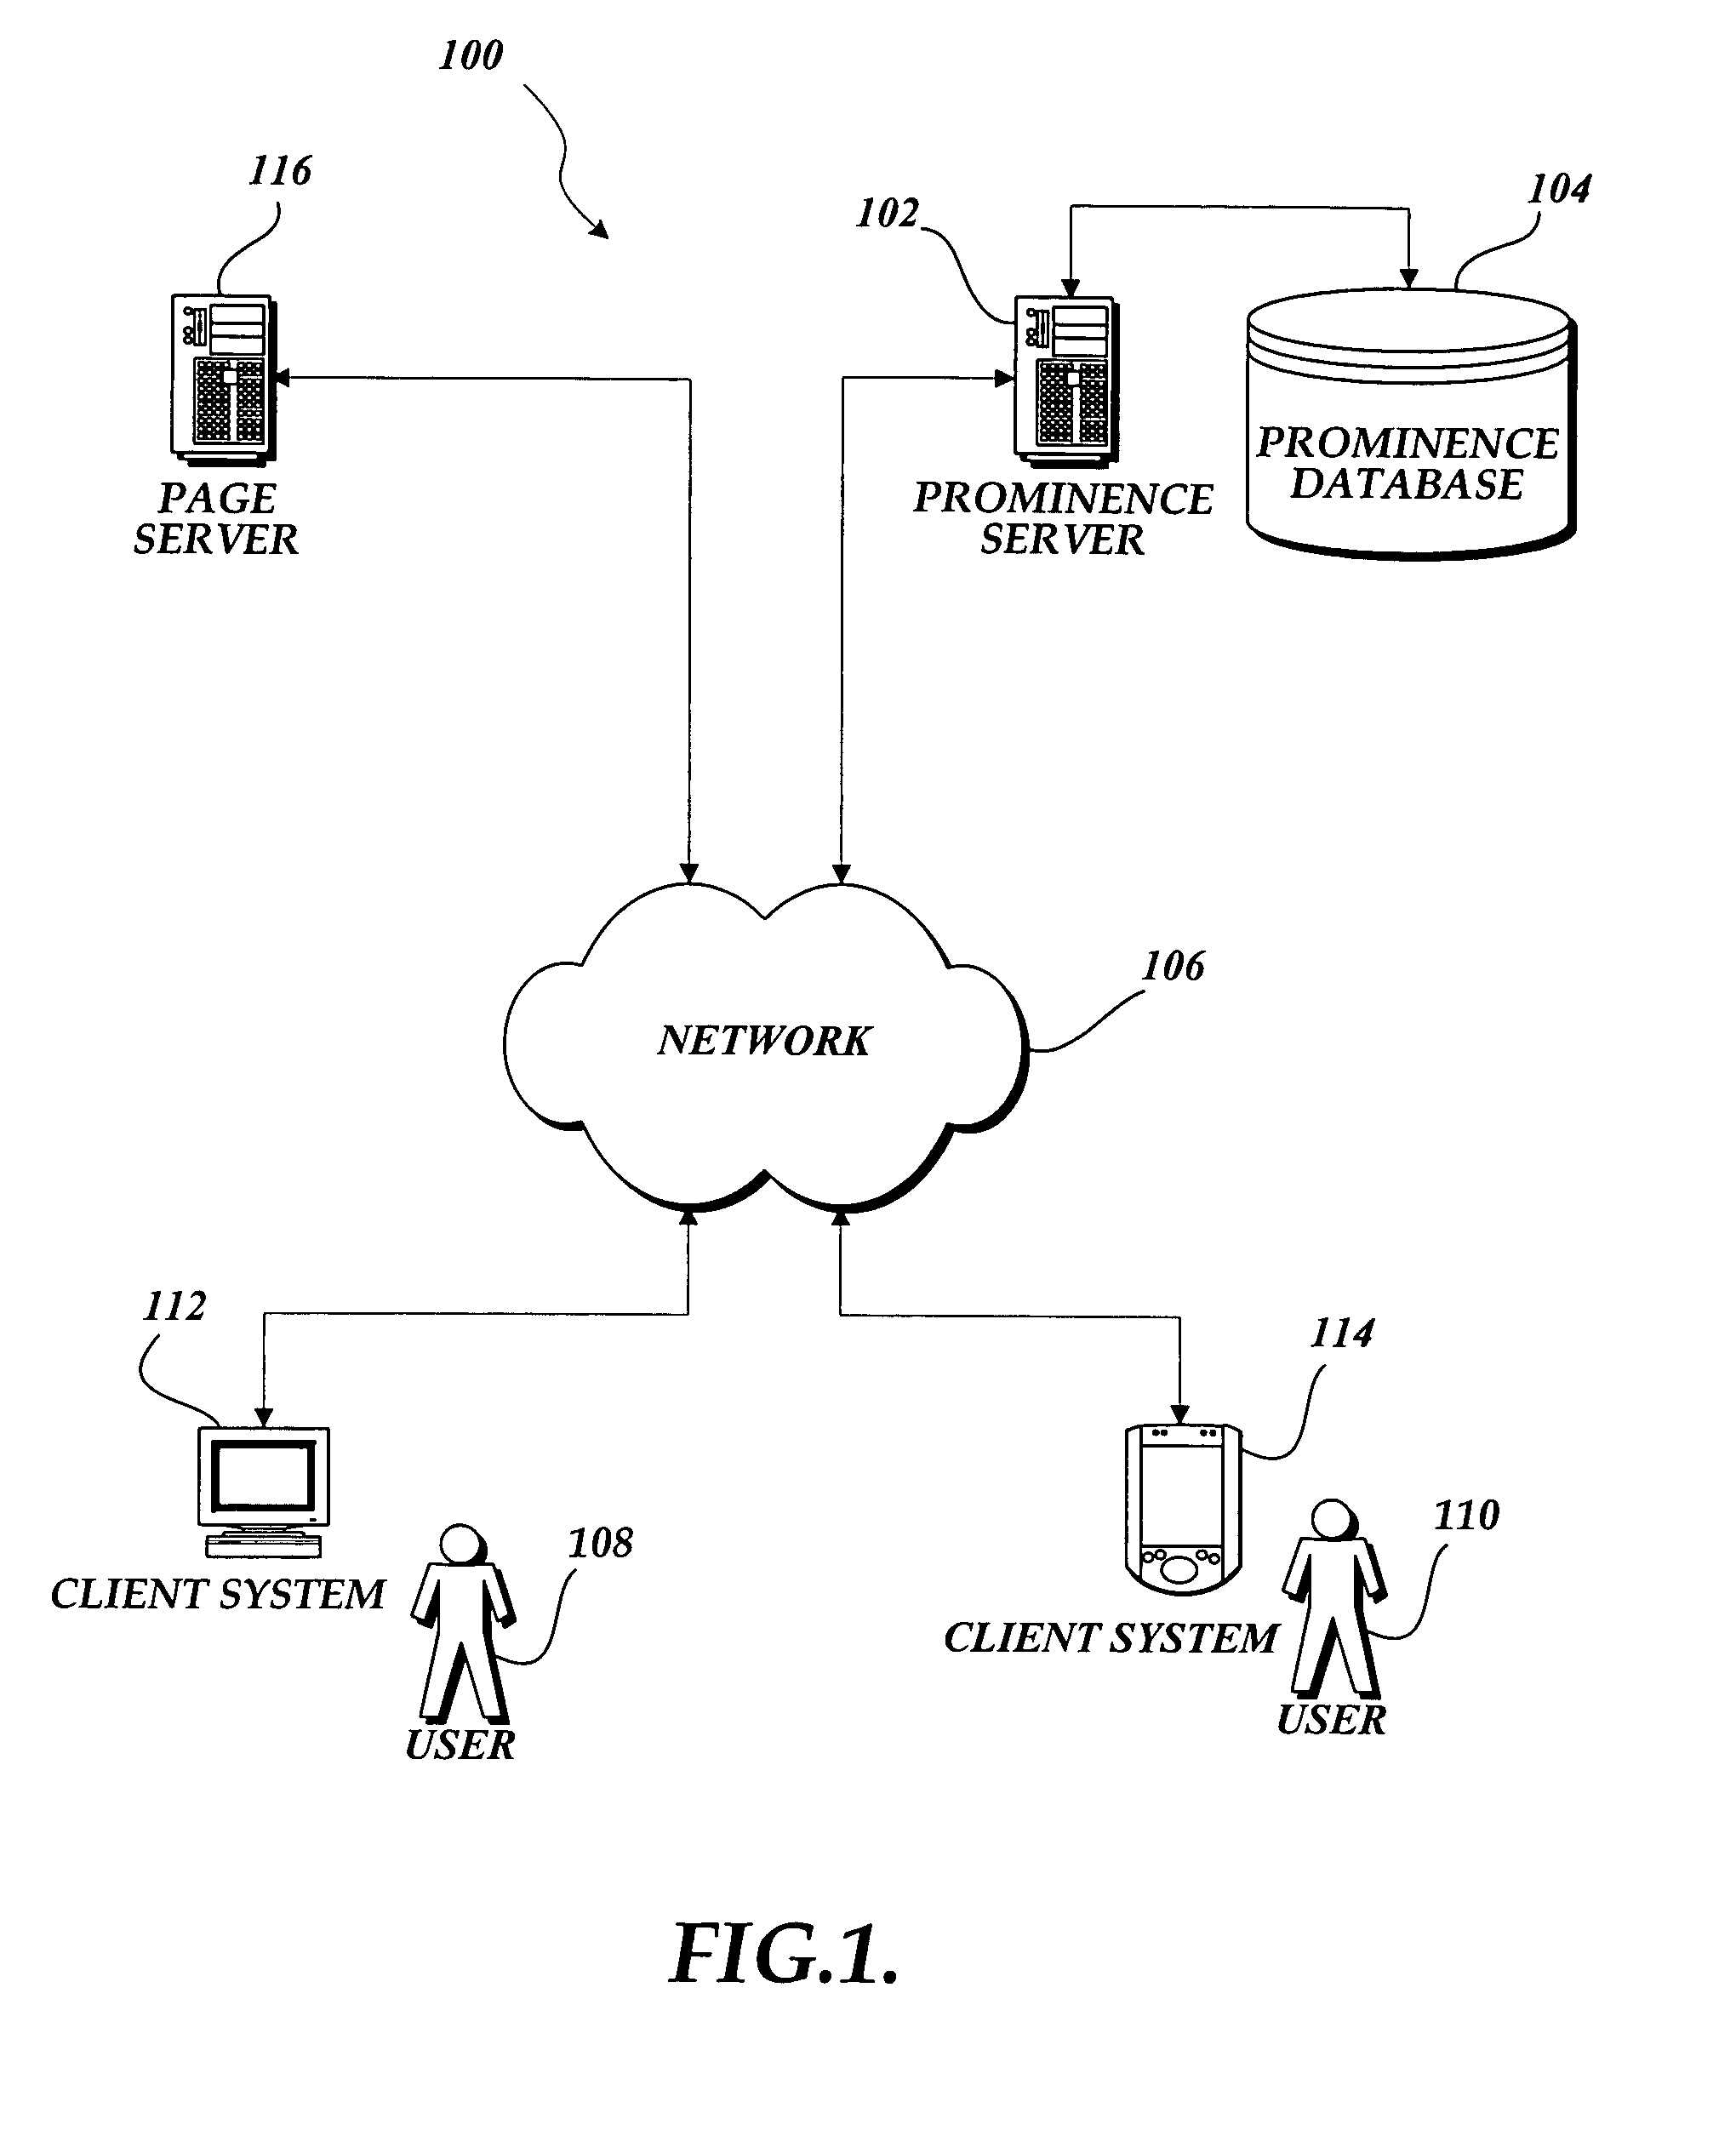 Method and system for displaying a hyperlink at multiple levels of prominence based on user interaction